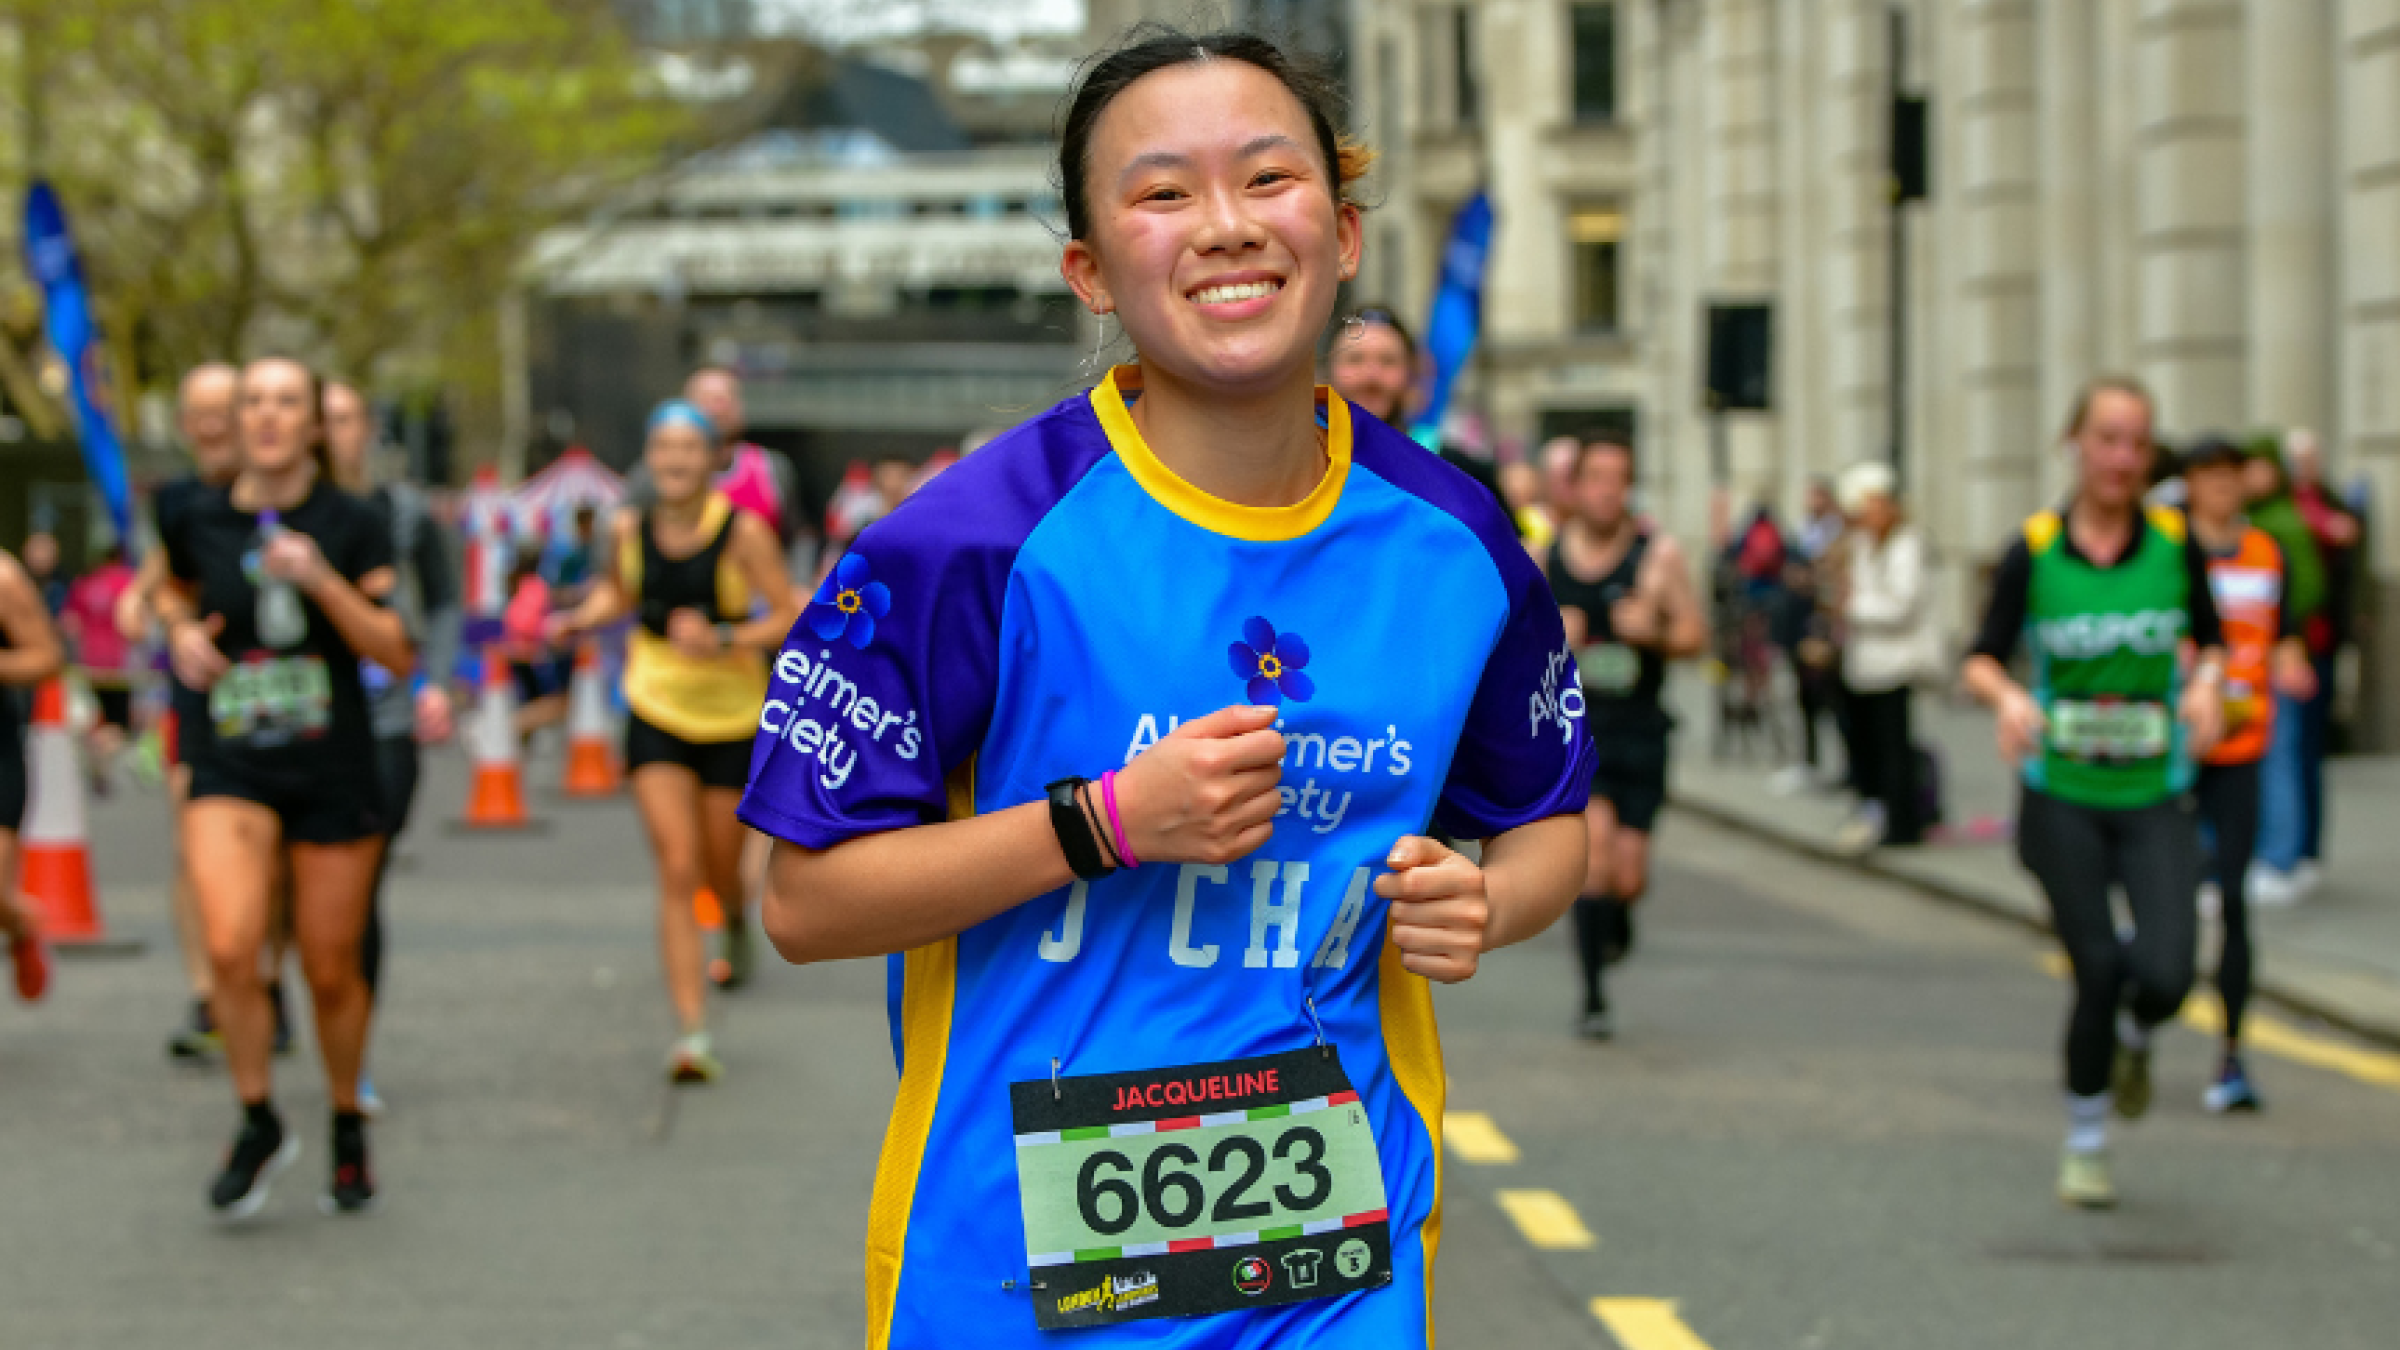 A person running ahead of a group down a city street, wearing an Alzheimers top, smiling at the camera.